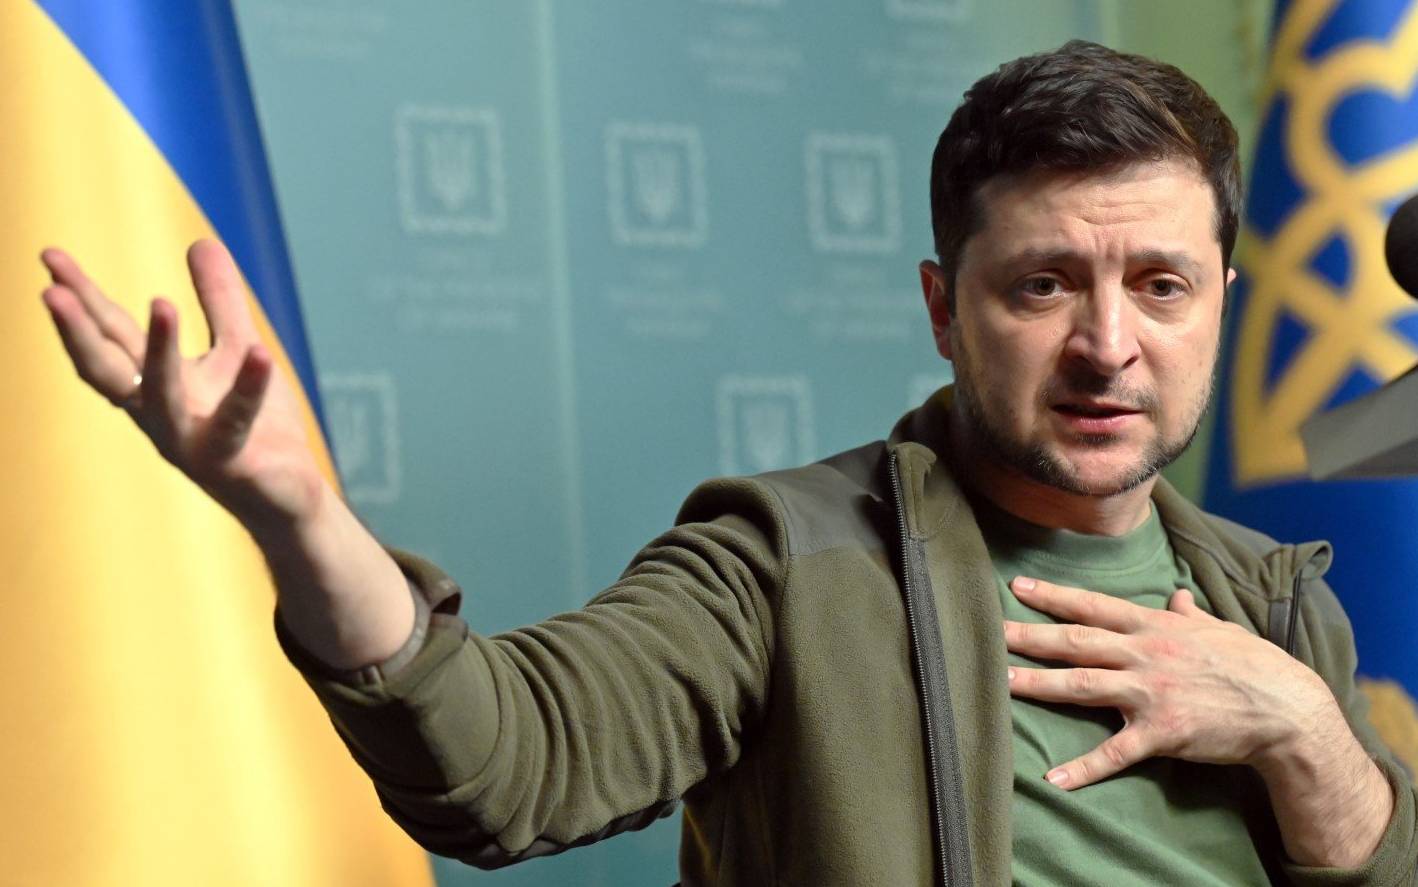 Ukrainian President Volodymyr Zelensky gestures as he speaks during a press conference in Kyiv on March 3, 2022. - Ukraine President Volodymyr Zelensky called on the West on March 3, 2022, to increase military aid to Ukraine, saying Russia would advance on the rest of Europe otherwise. "If you do not have the power to close the skies, then give me planes!" Zelensky said at a press conference. "If we are no more then, God forbid, Latvia, Lithuania, Estonia will be next," he said, adding: "Believe me." (Photo by Sergei SUPINSKY / AFP)